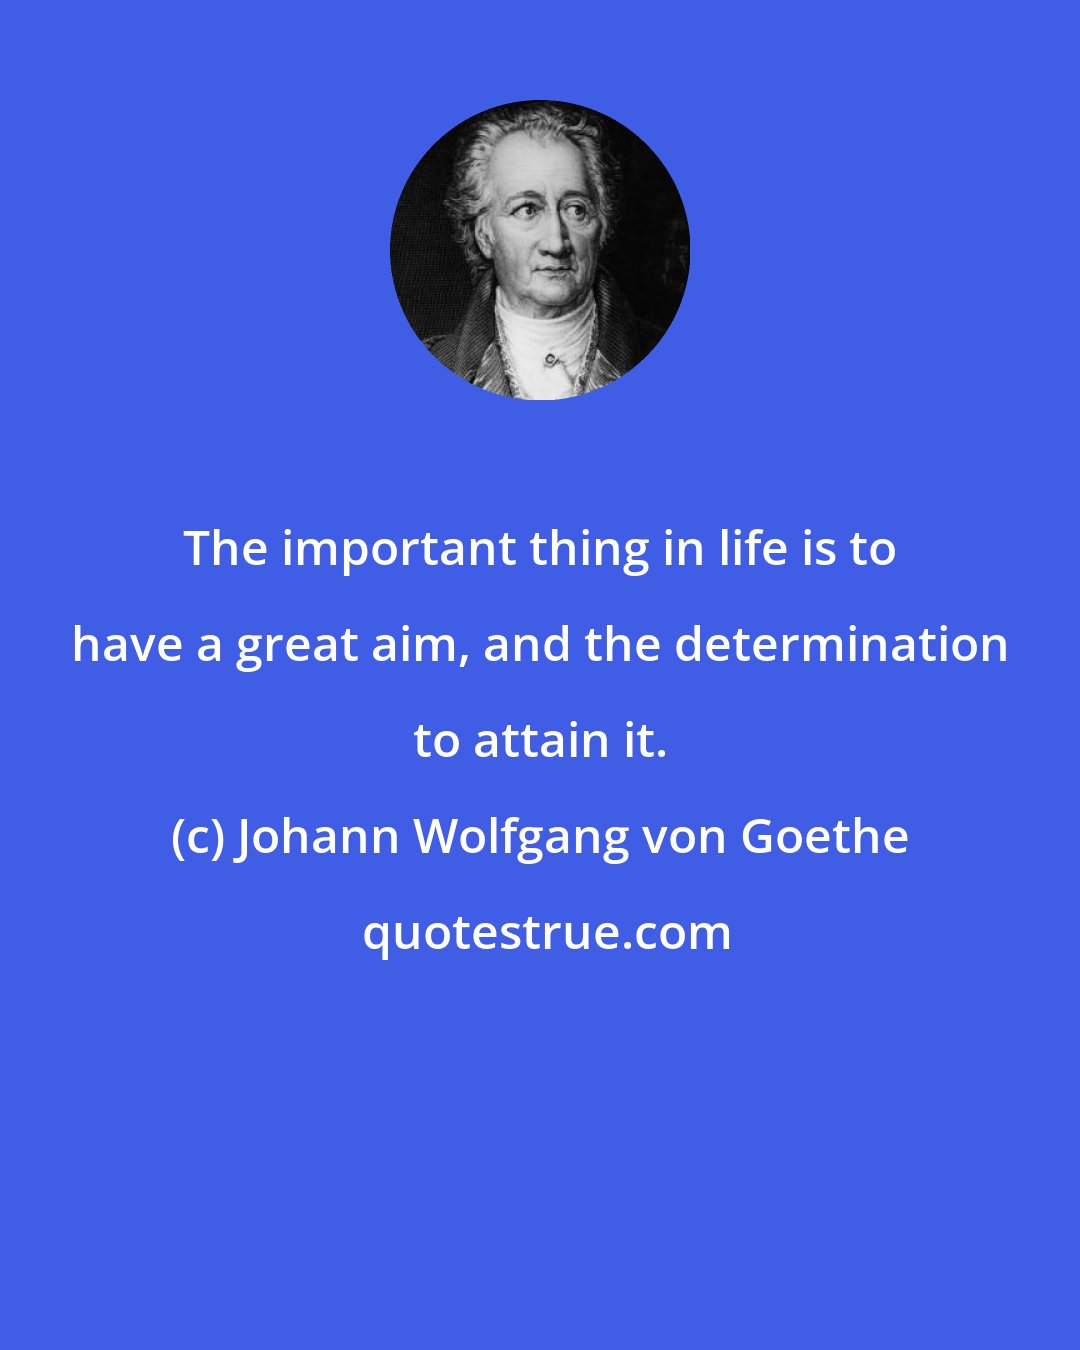 Johann Wolfgang von Goethe: The important thing in life is to have a great aim, and the determination to attain it.